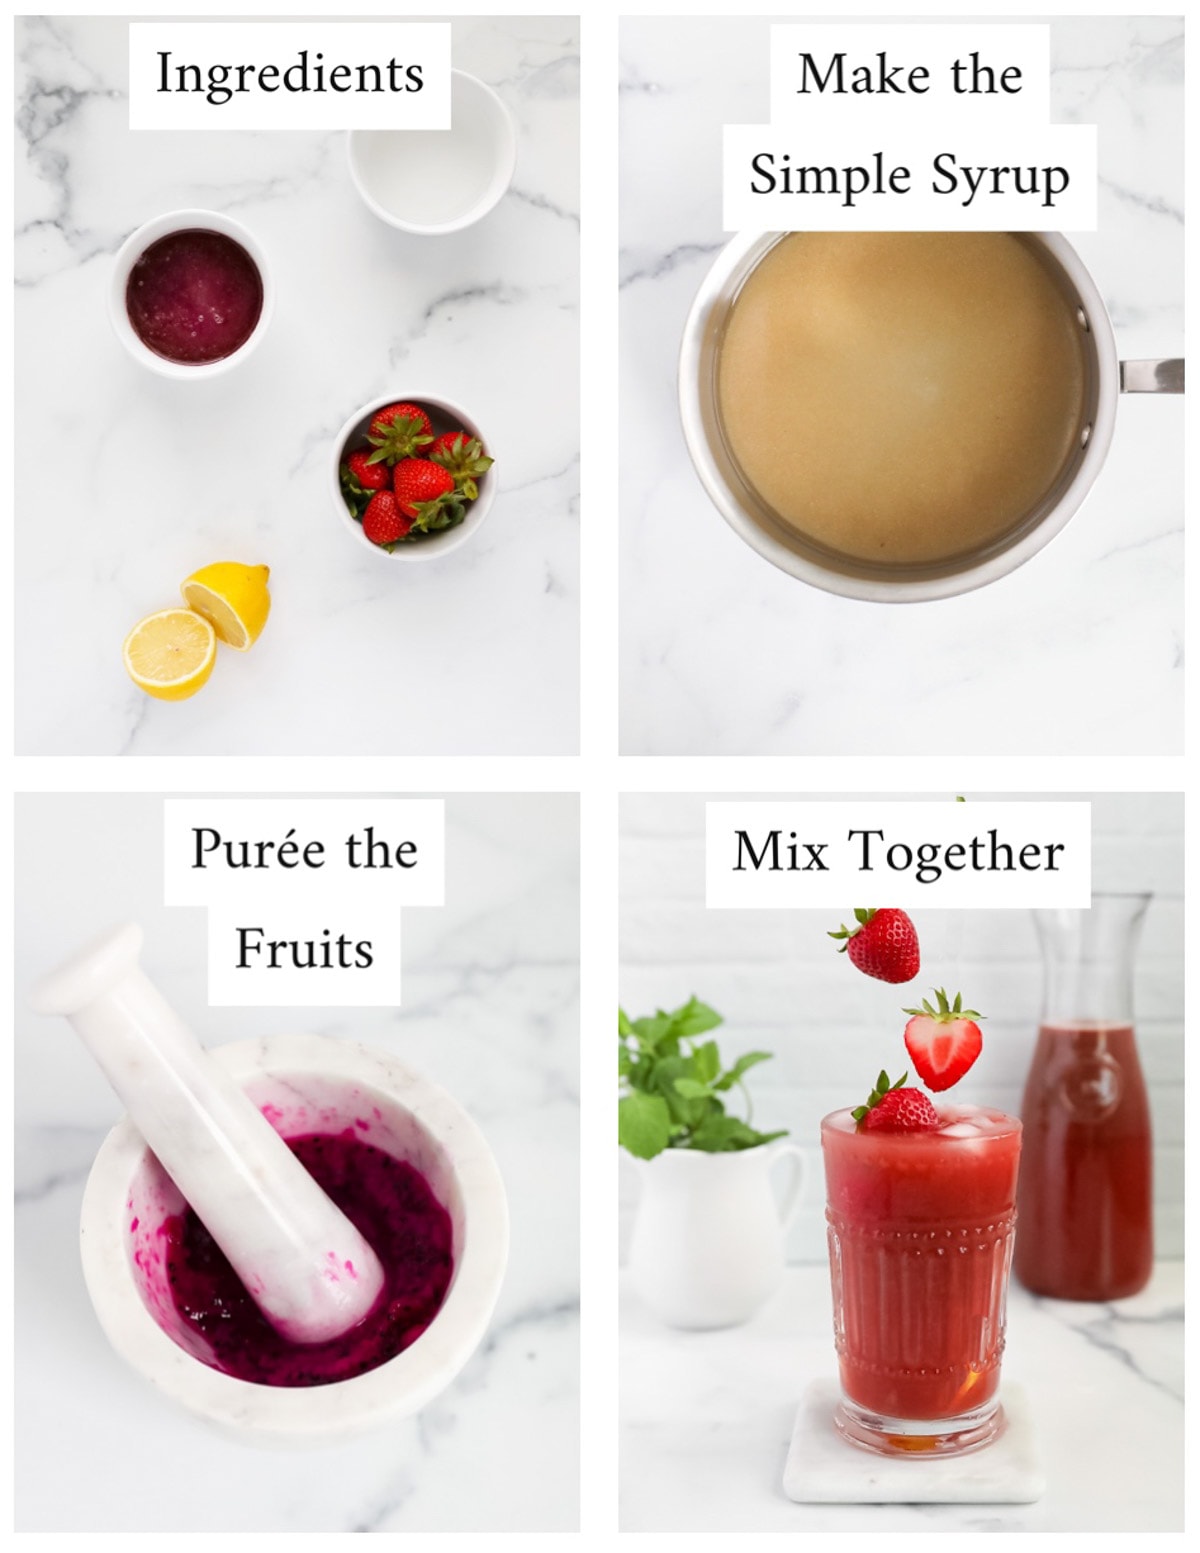 Four pictures in a collage including: ingredients, a pot full of simple syrup labeled "simple syrup", "puree the fruits" with a bowl of pureed fruit, and "mix together" with a glass filled with pink lemonade